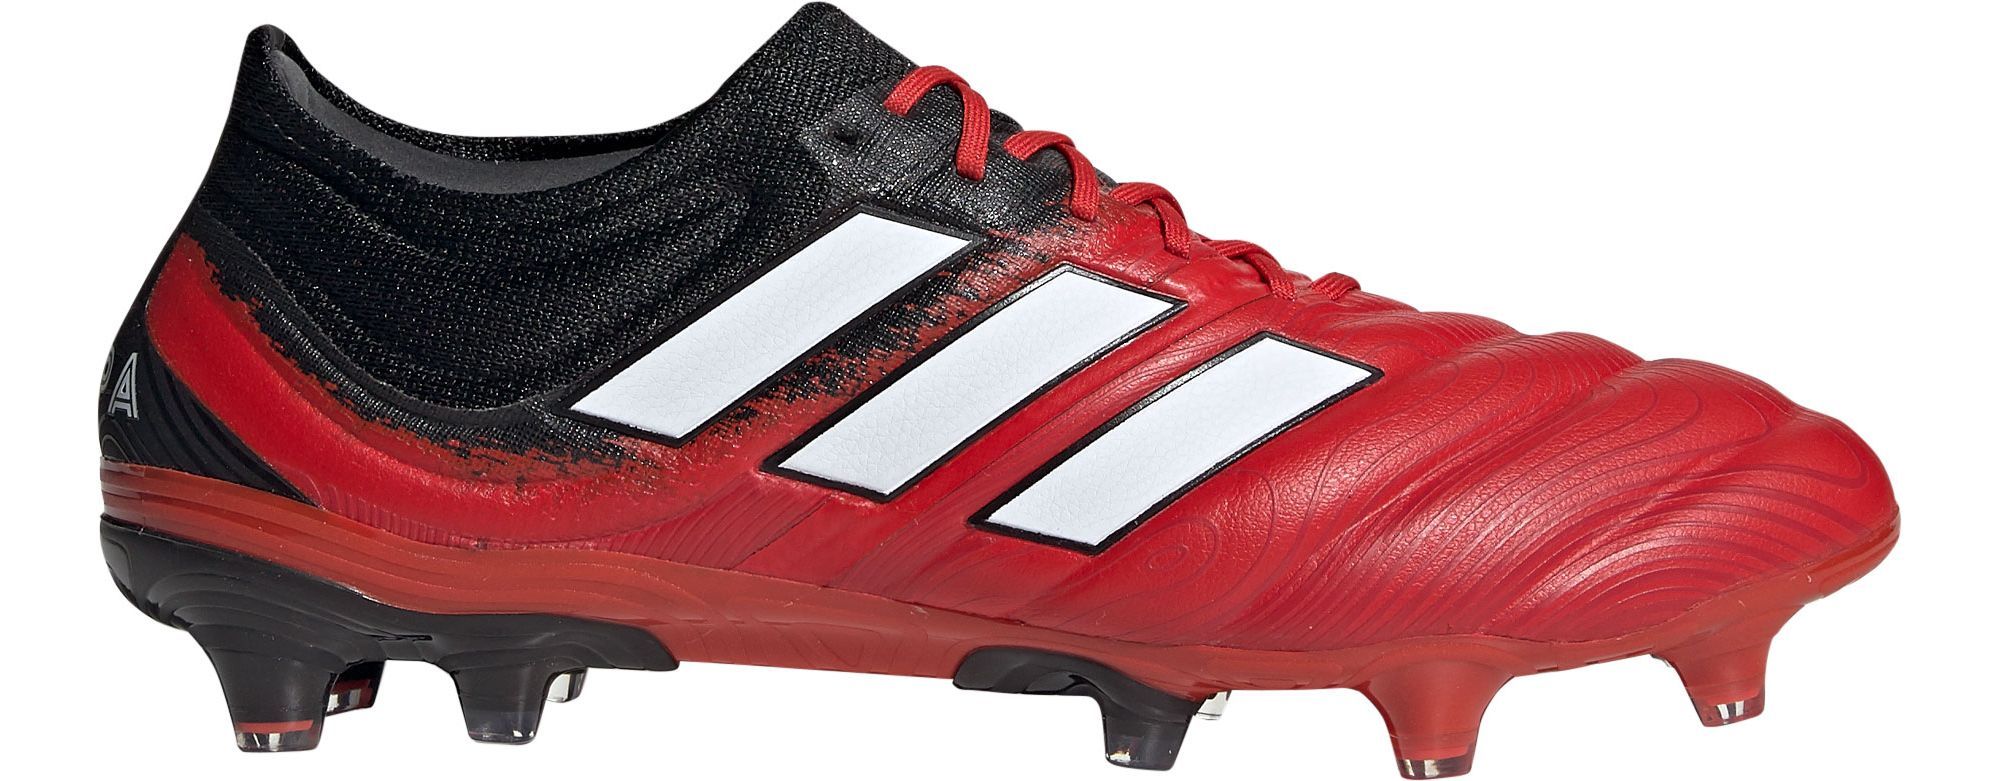 Adidas COPA 20.1 FIRM GROUND CLEATS - RED/BLACK